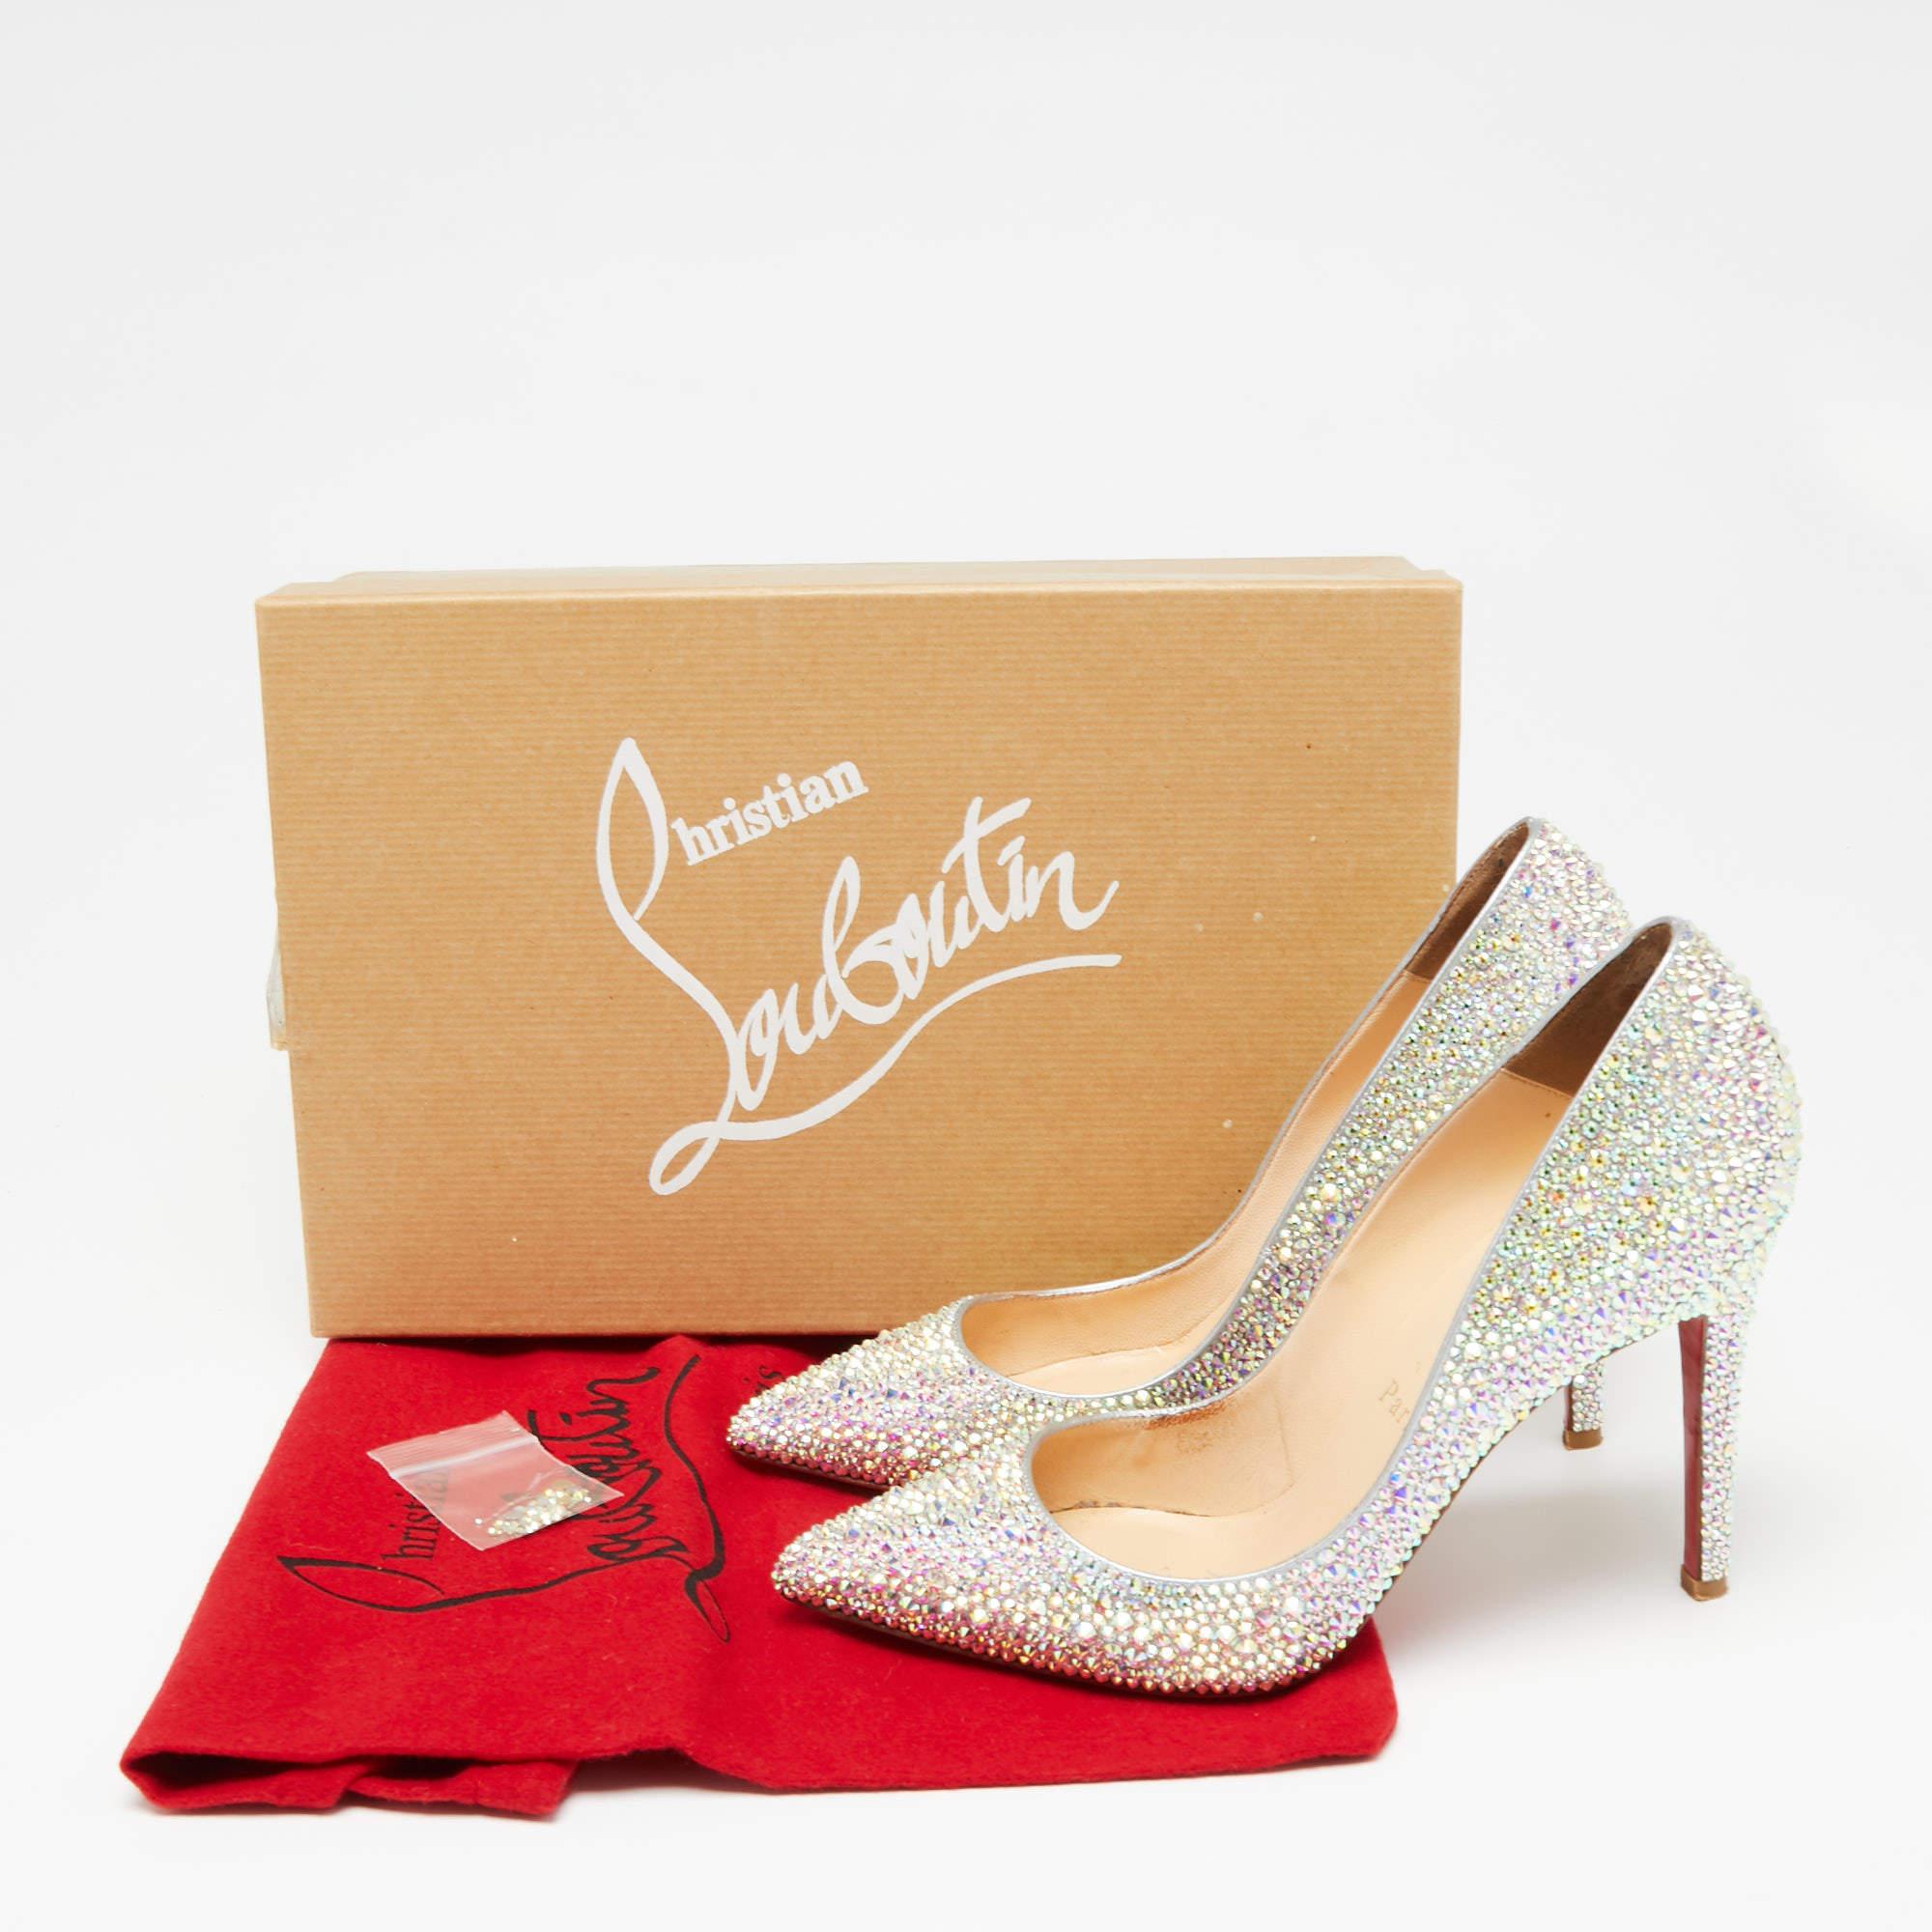 Christian Louboutin Multicolor Leather Pigalle Strass Degrade Pumps Size 36 3